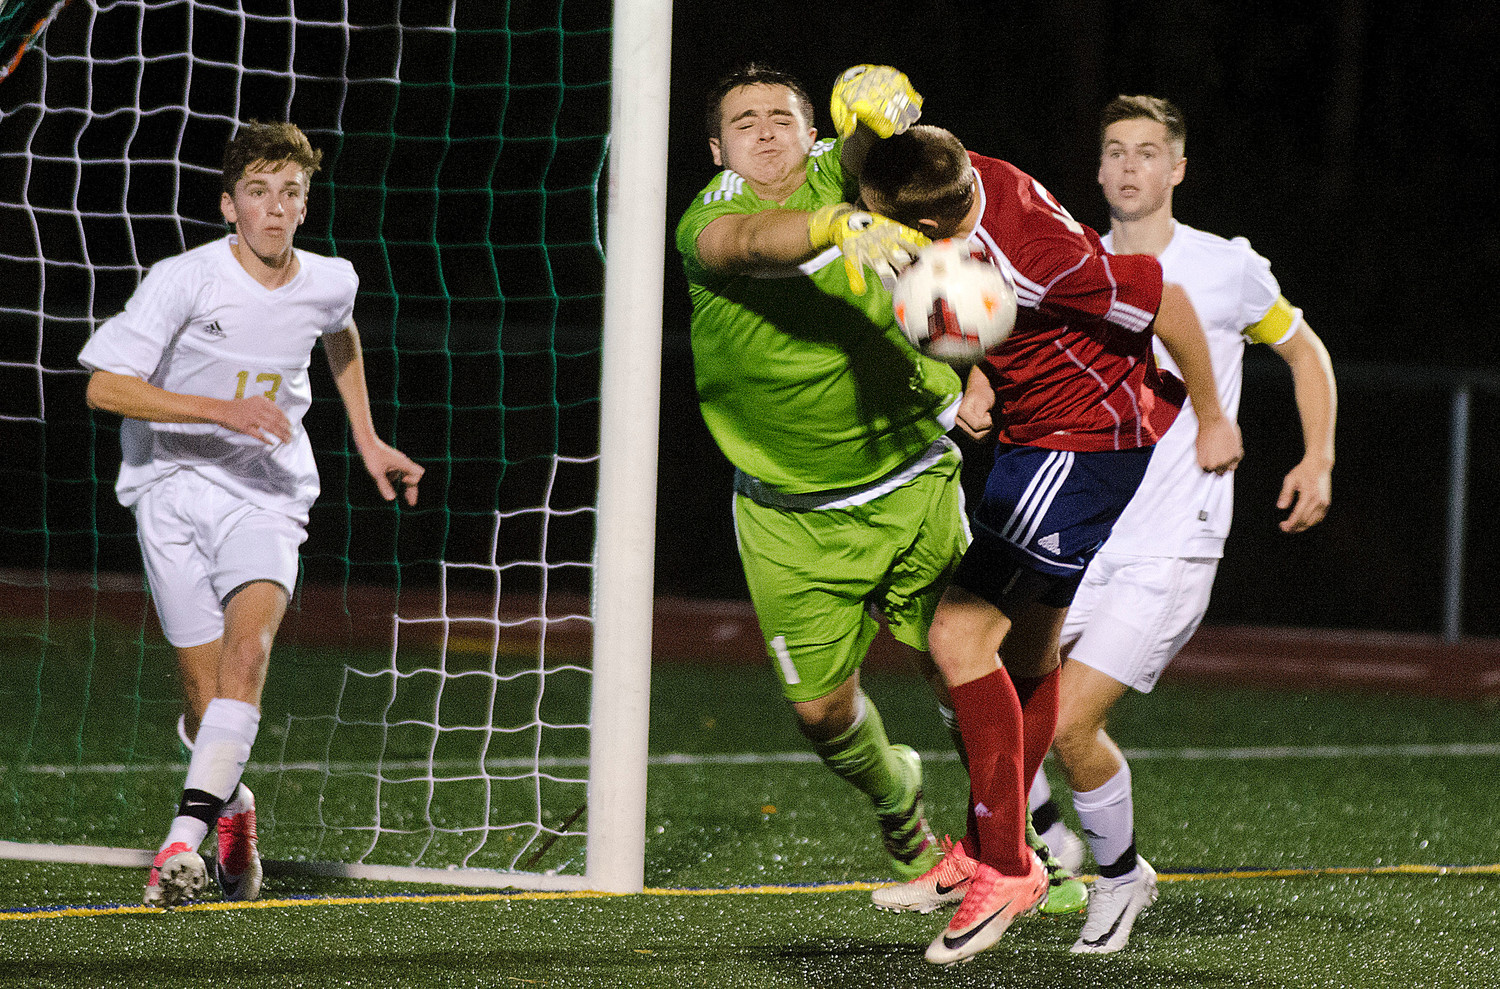 Morel grabs Christian McNeilly and the ball during a Pats corner kick.